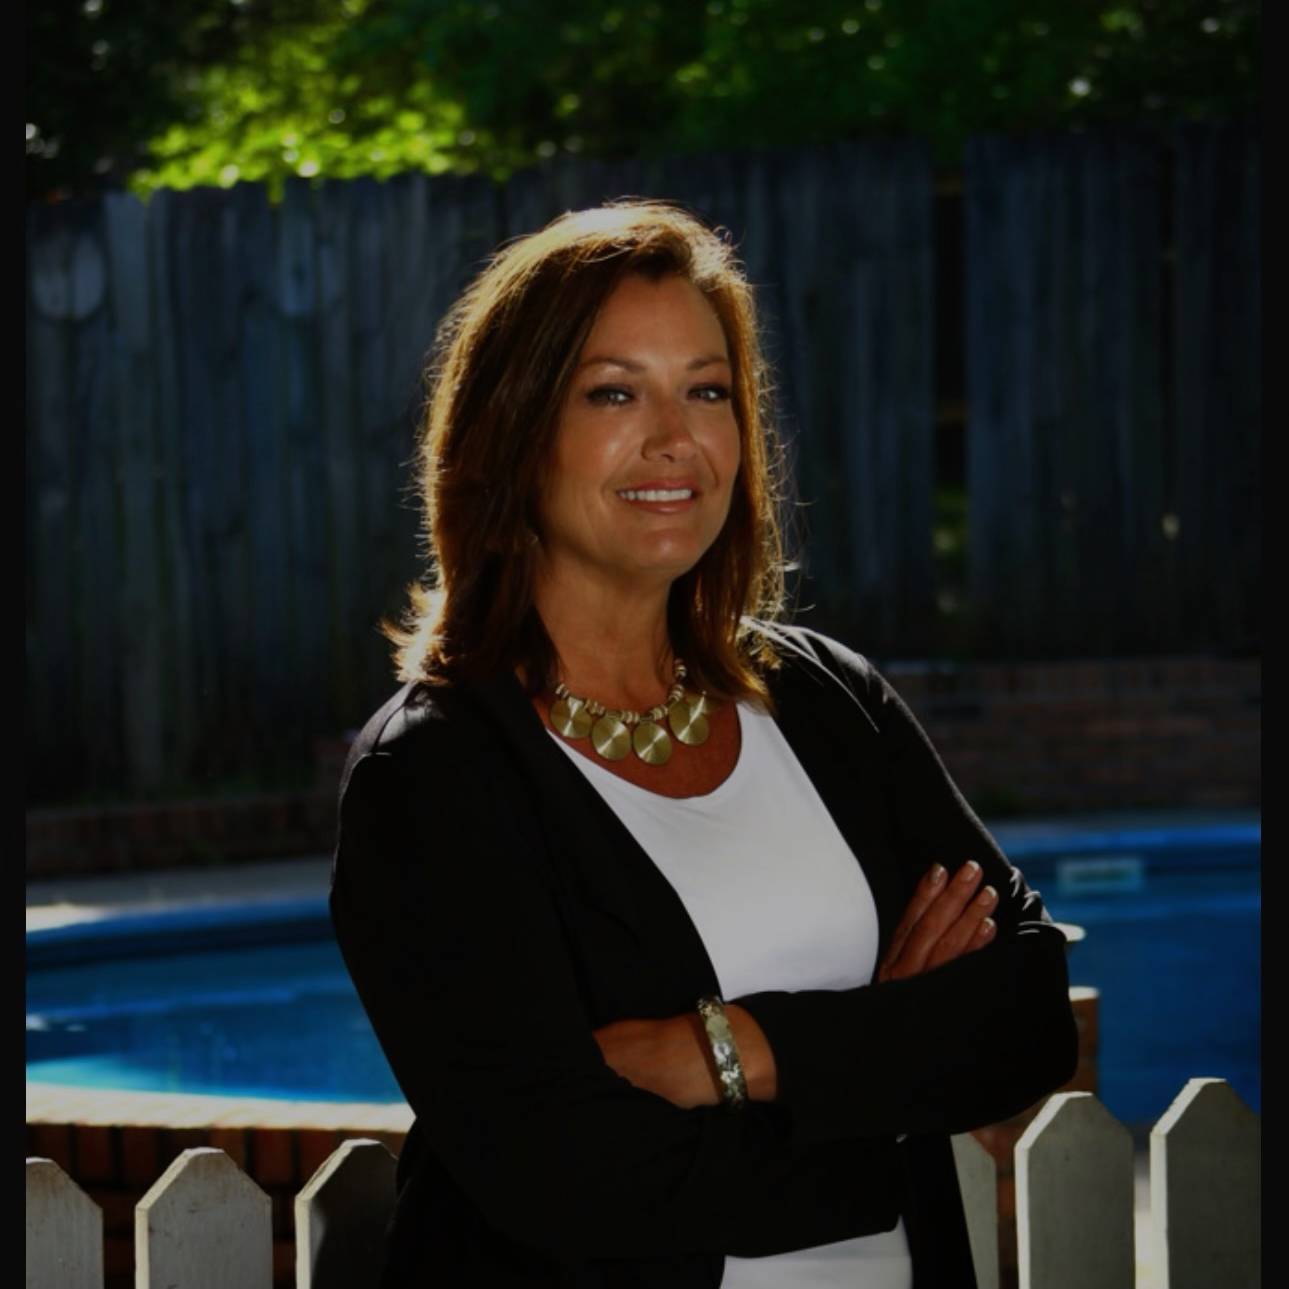 Nita Summerlin with Remax Realty Professionals - Co-Chairperson